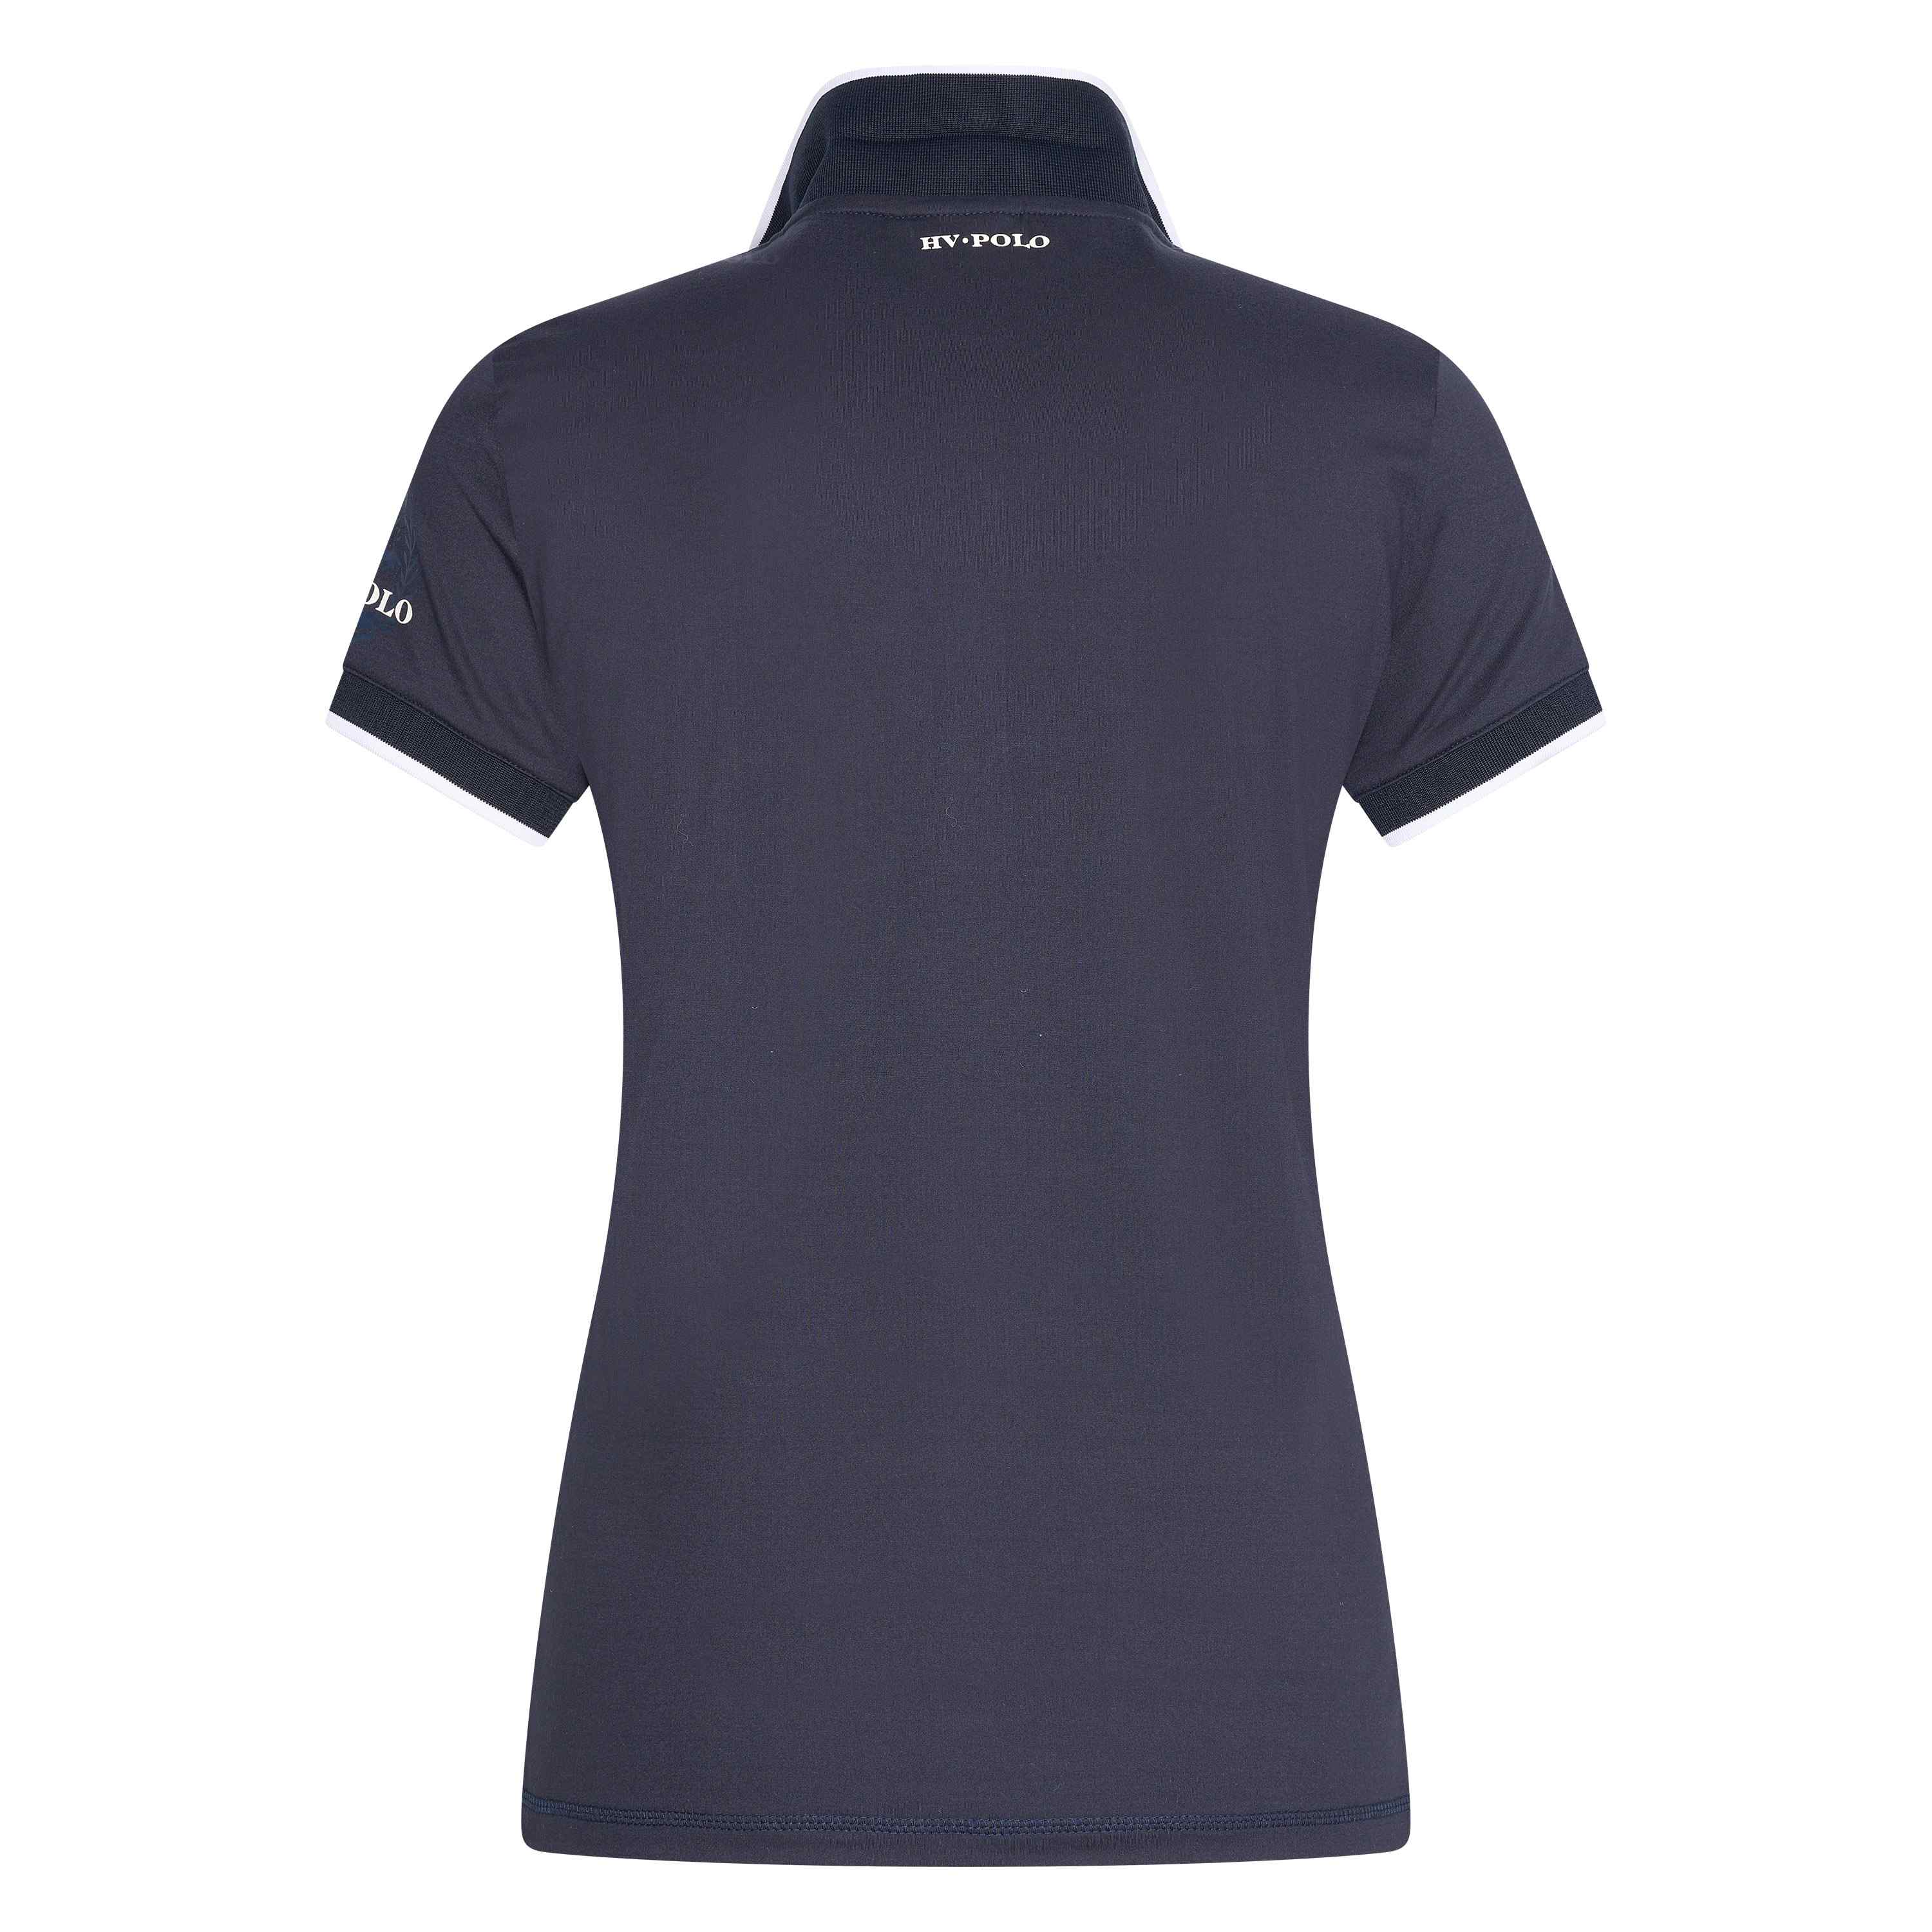 HV POLO stylisches Damen Funktions Polo Shirt Favouritas - navy - L - 2